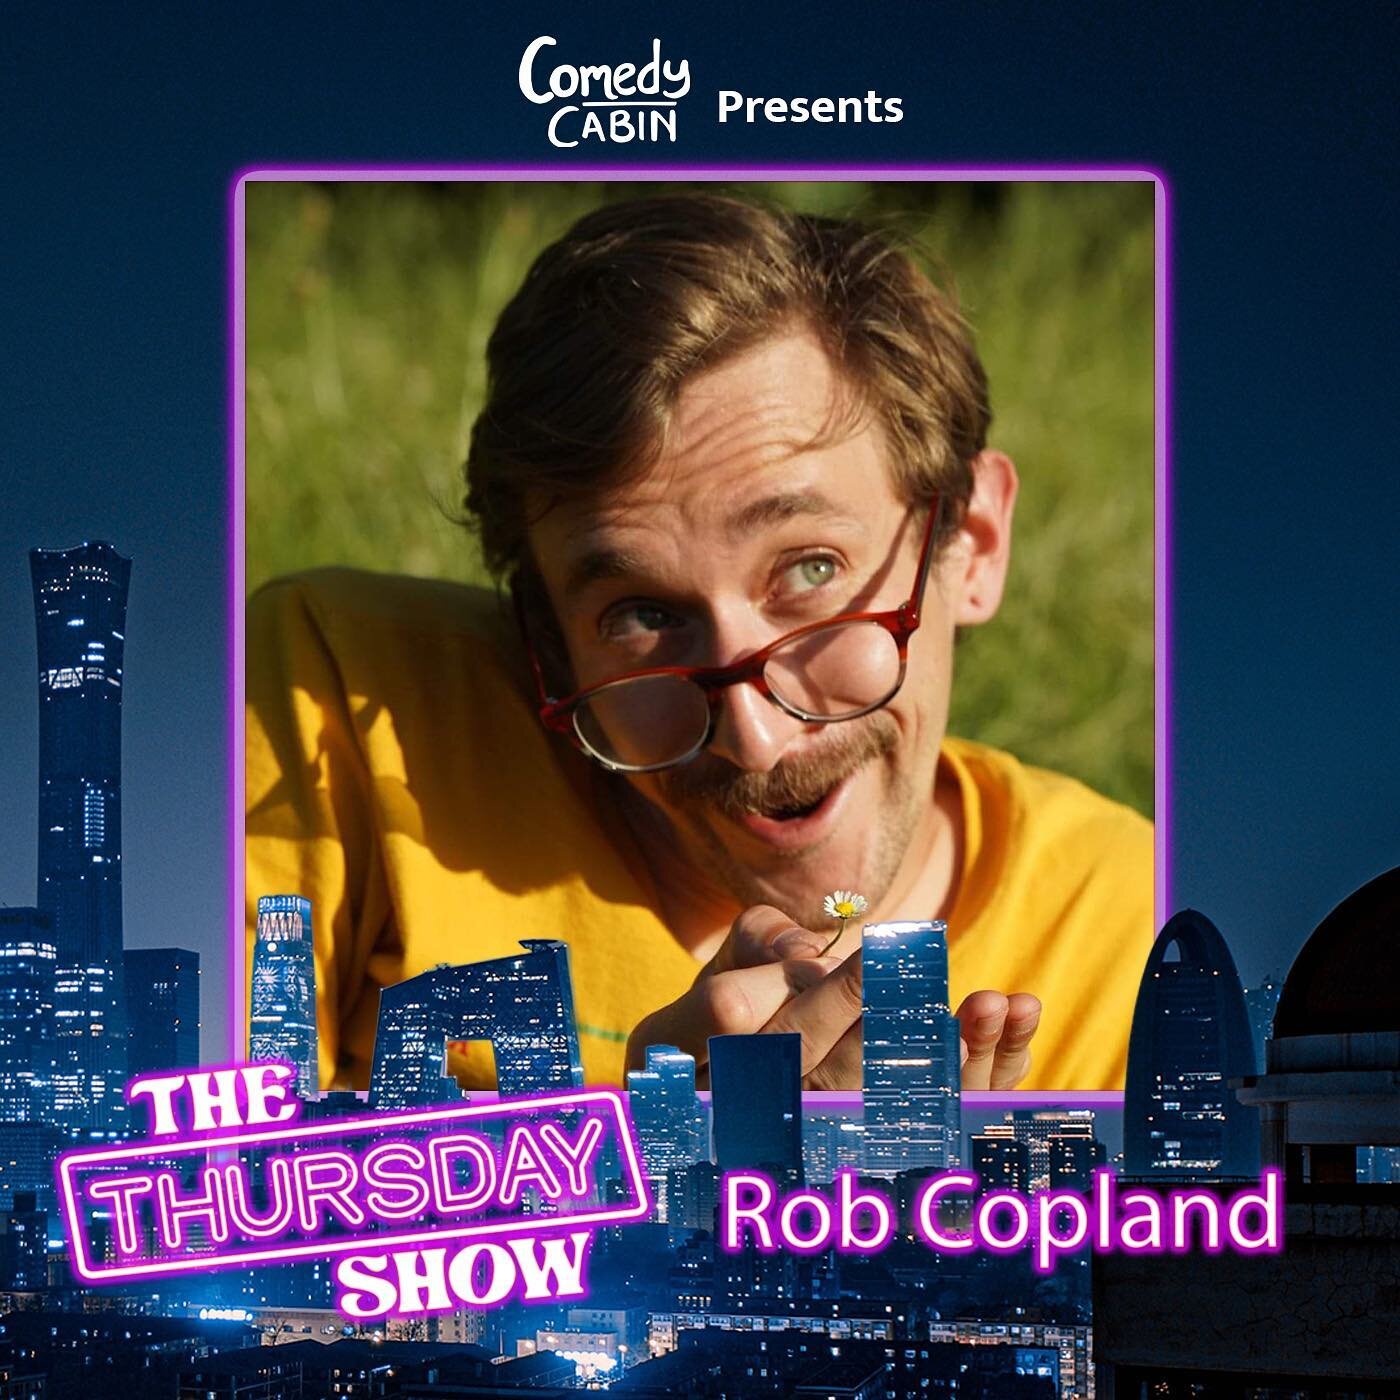 This week on The Thursday Show with @andpetewells - the incredible talents and bodies of @robertdcopland and @marywiththegoldshoes drop by!

It&rsquo;s going to be a chaotic blast. Don&rsquo;t miss it!

🎟️comedycabin.club/tix